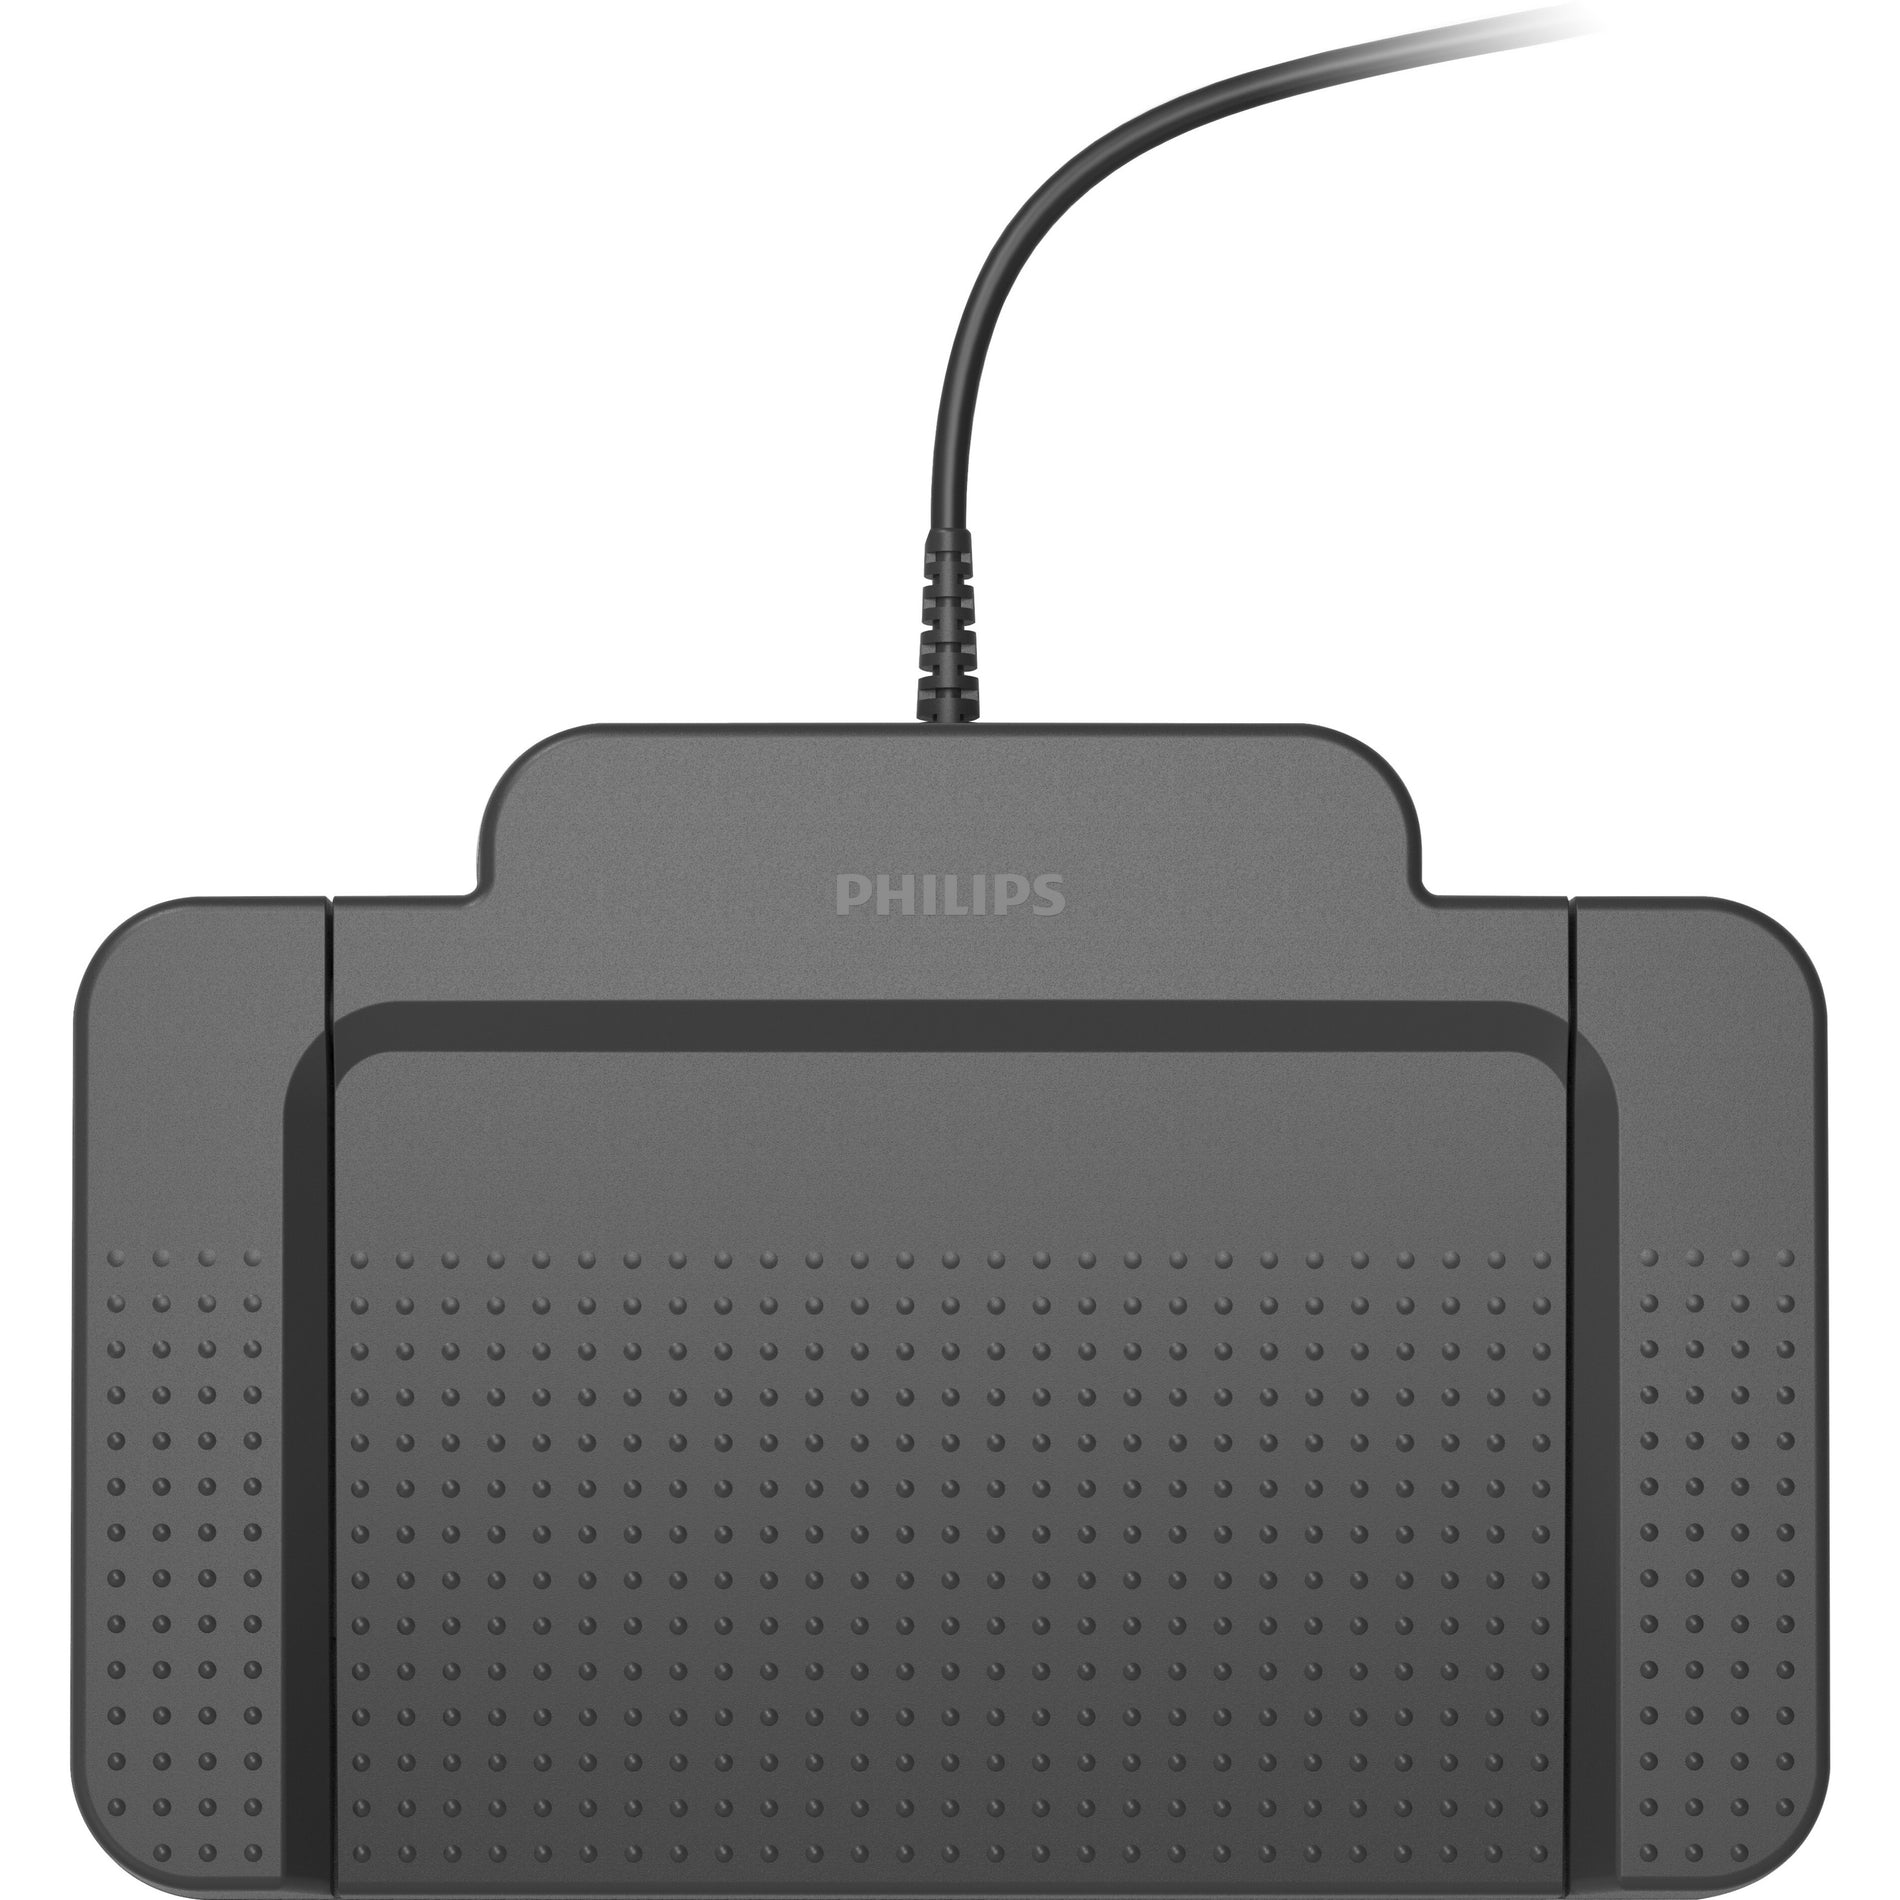 Philips ACC2320/00 USB Foot Control 2320 3-Pedal (US-style), Transcription Foot Pedal